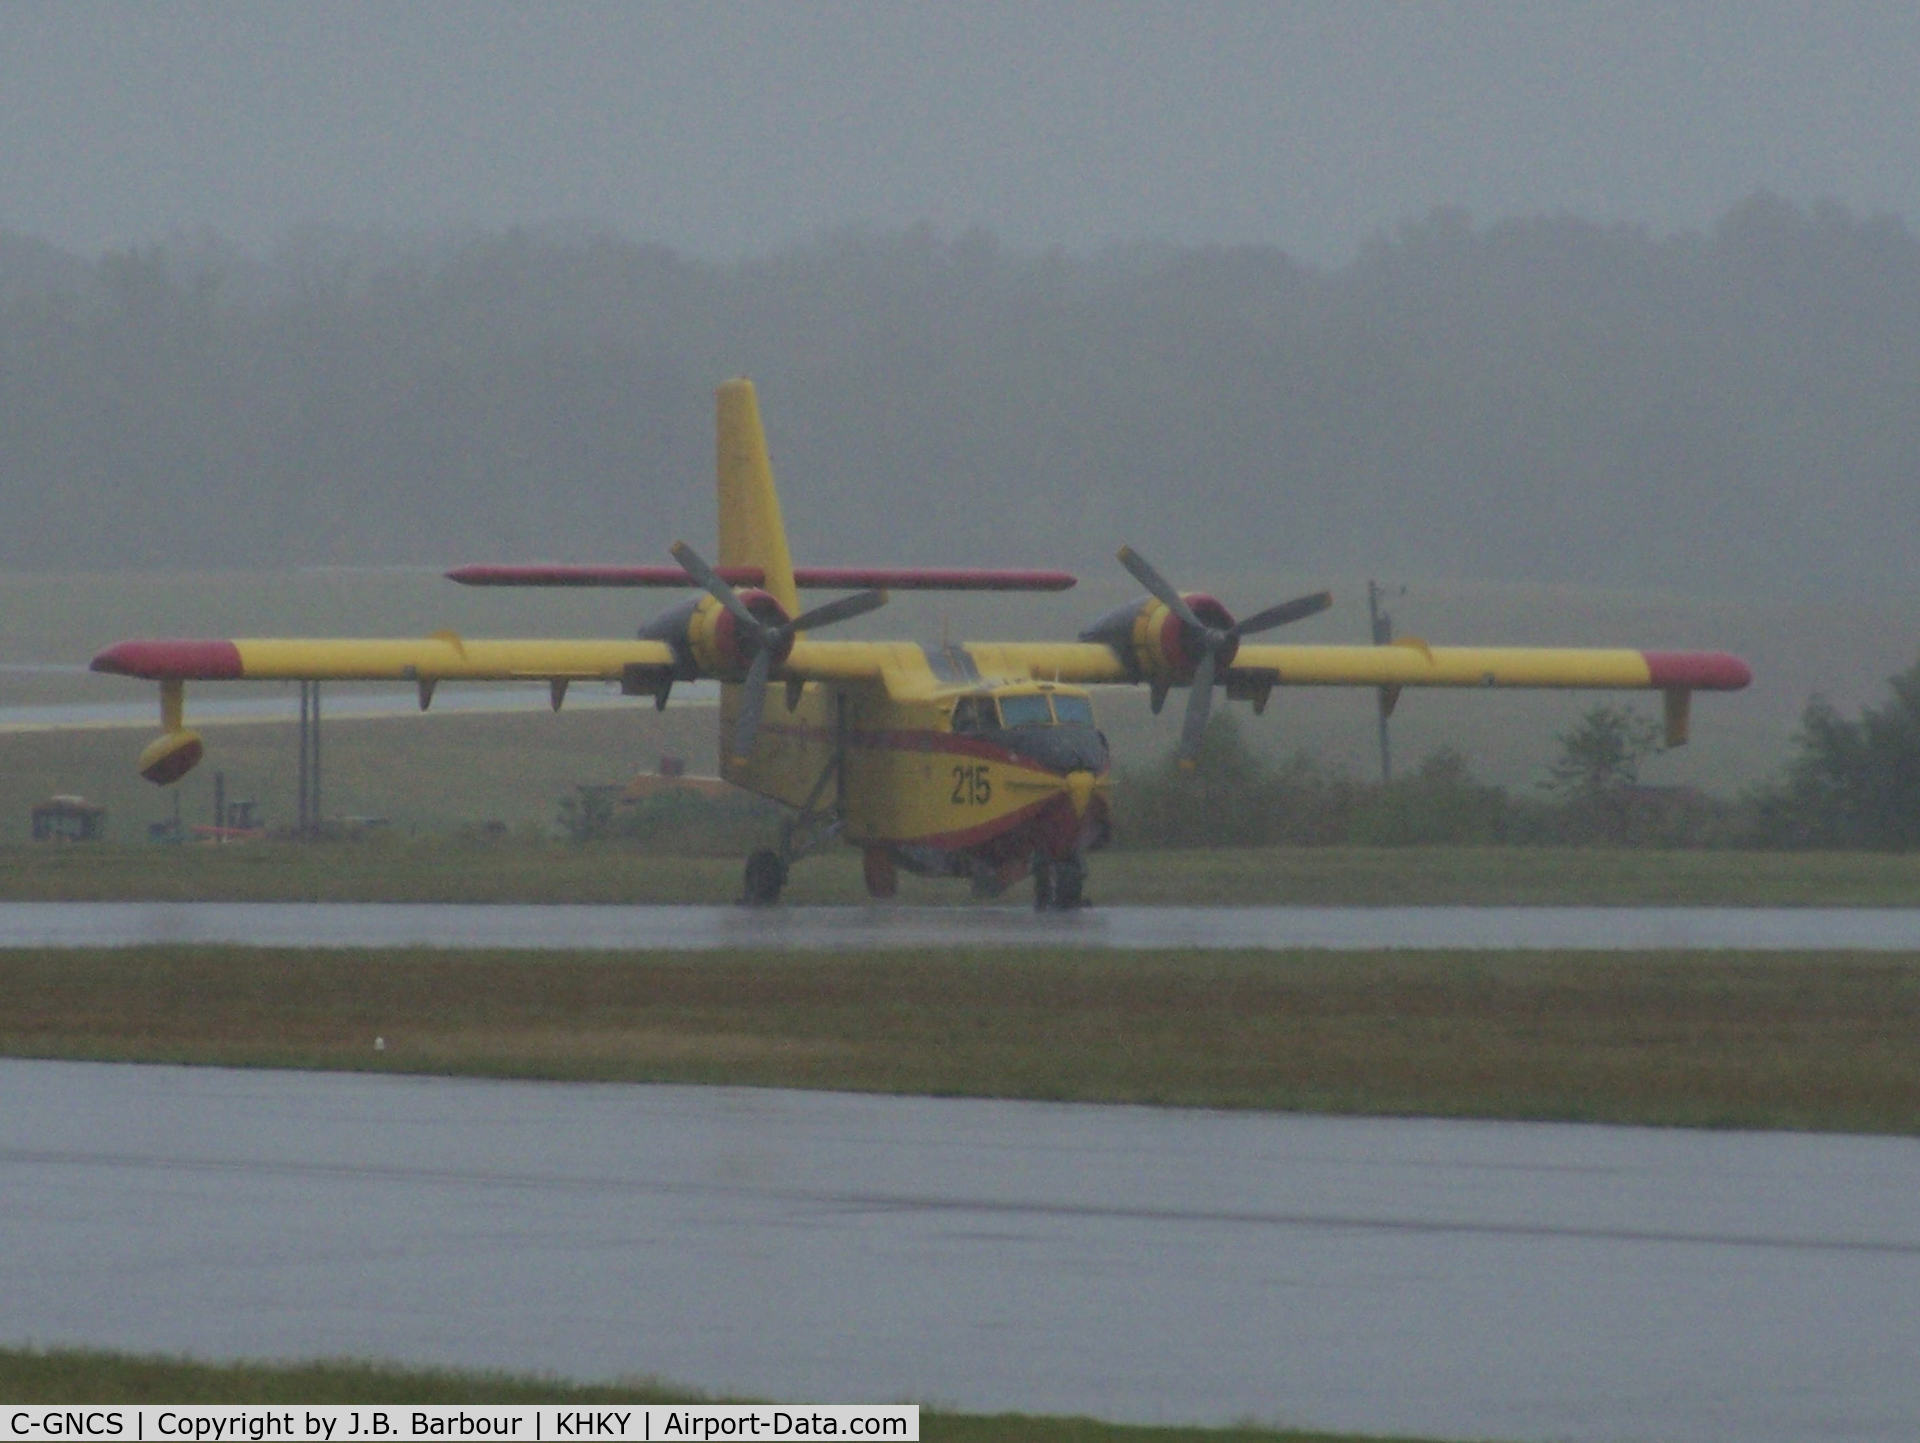 C-GNCS, 1969 Canadair CL-215-I (CL-215-1A10) C/N 1008, A very wet day to be out taking photos, but rain was needed.  Possible a Canadair CL-215